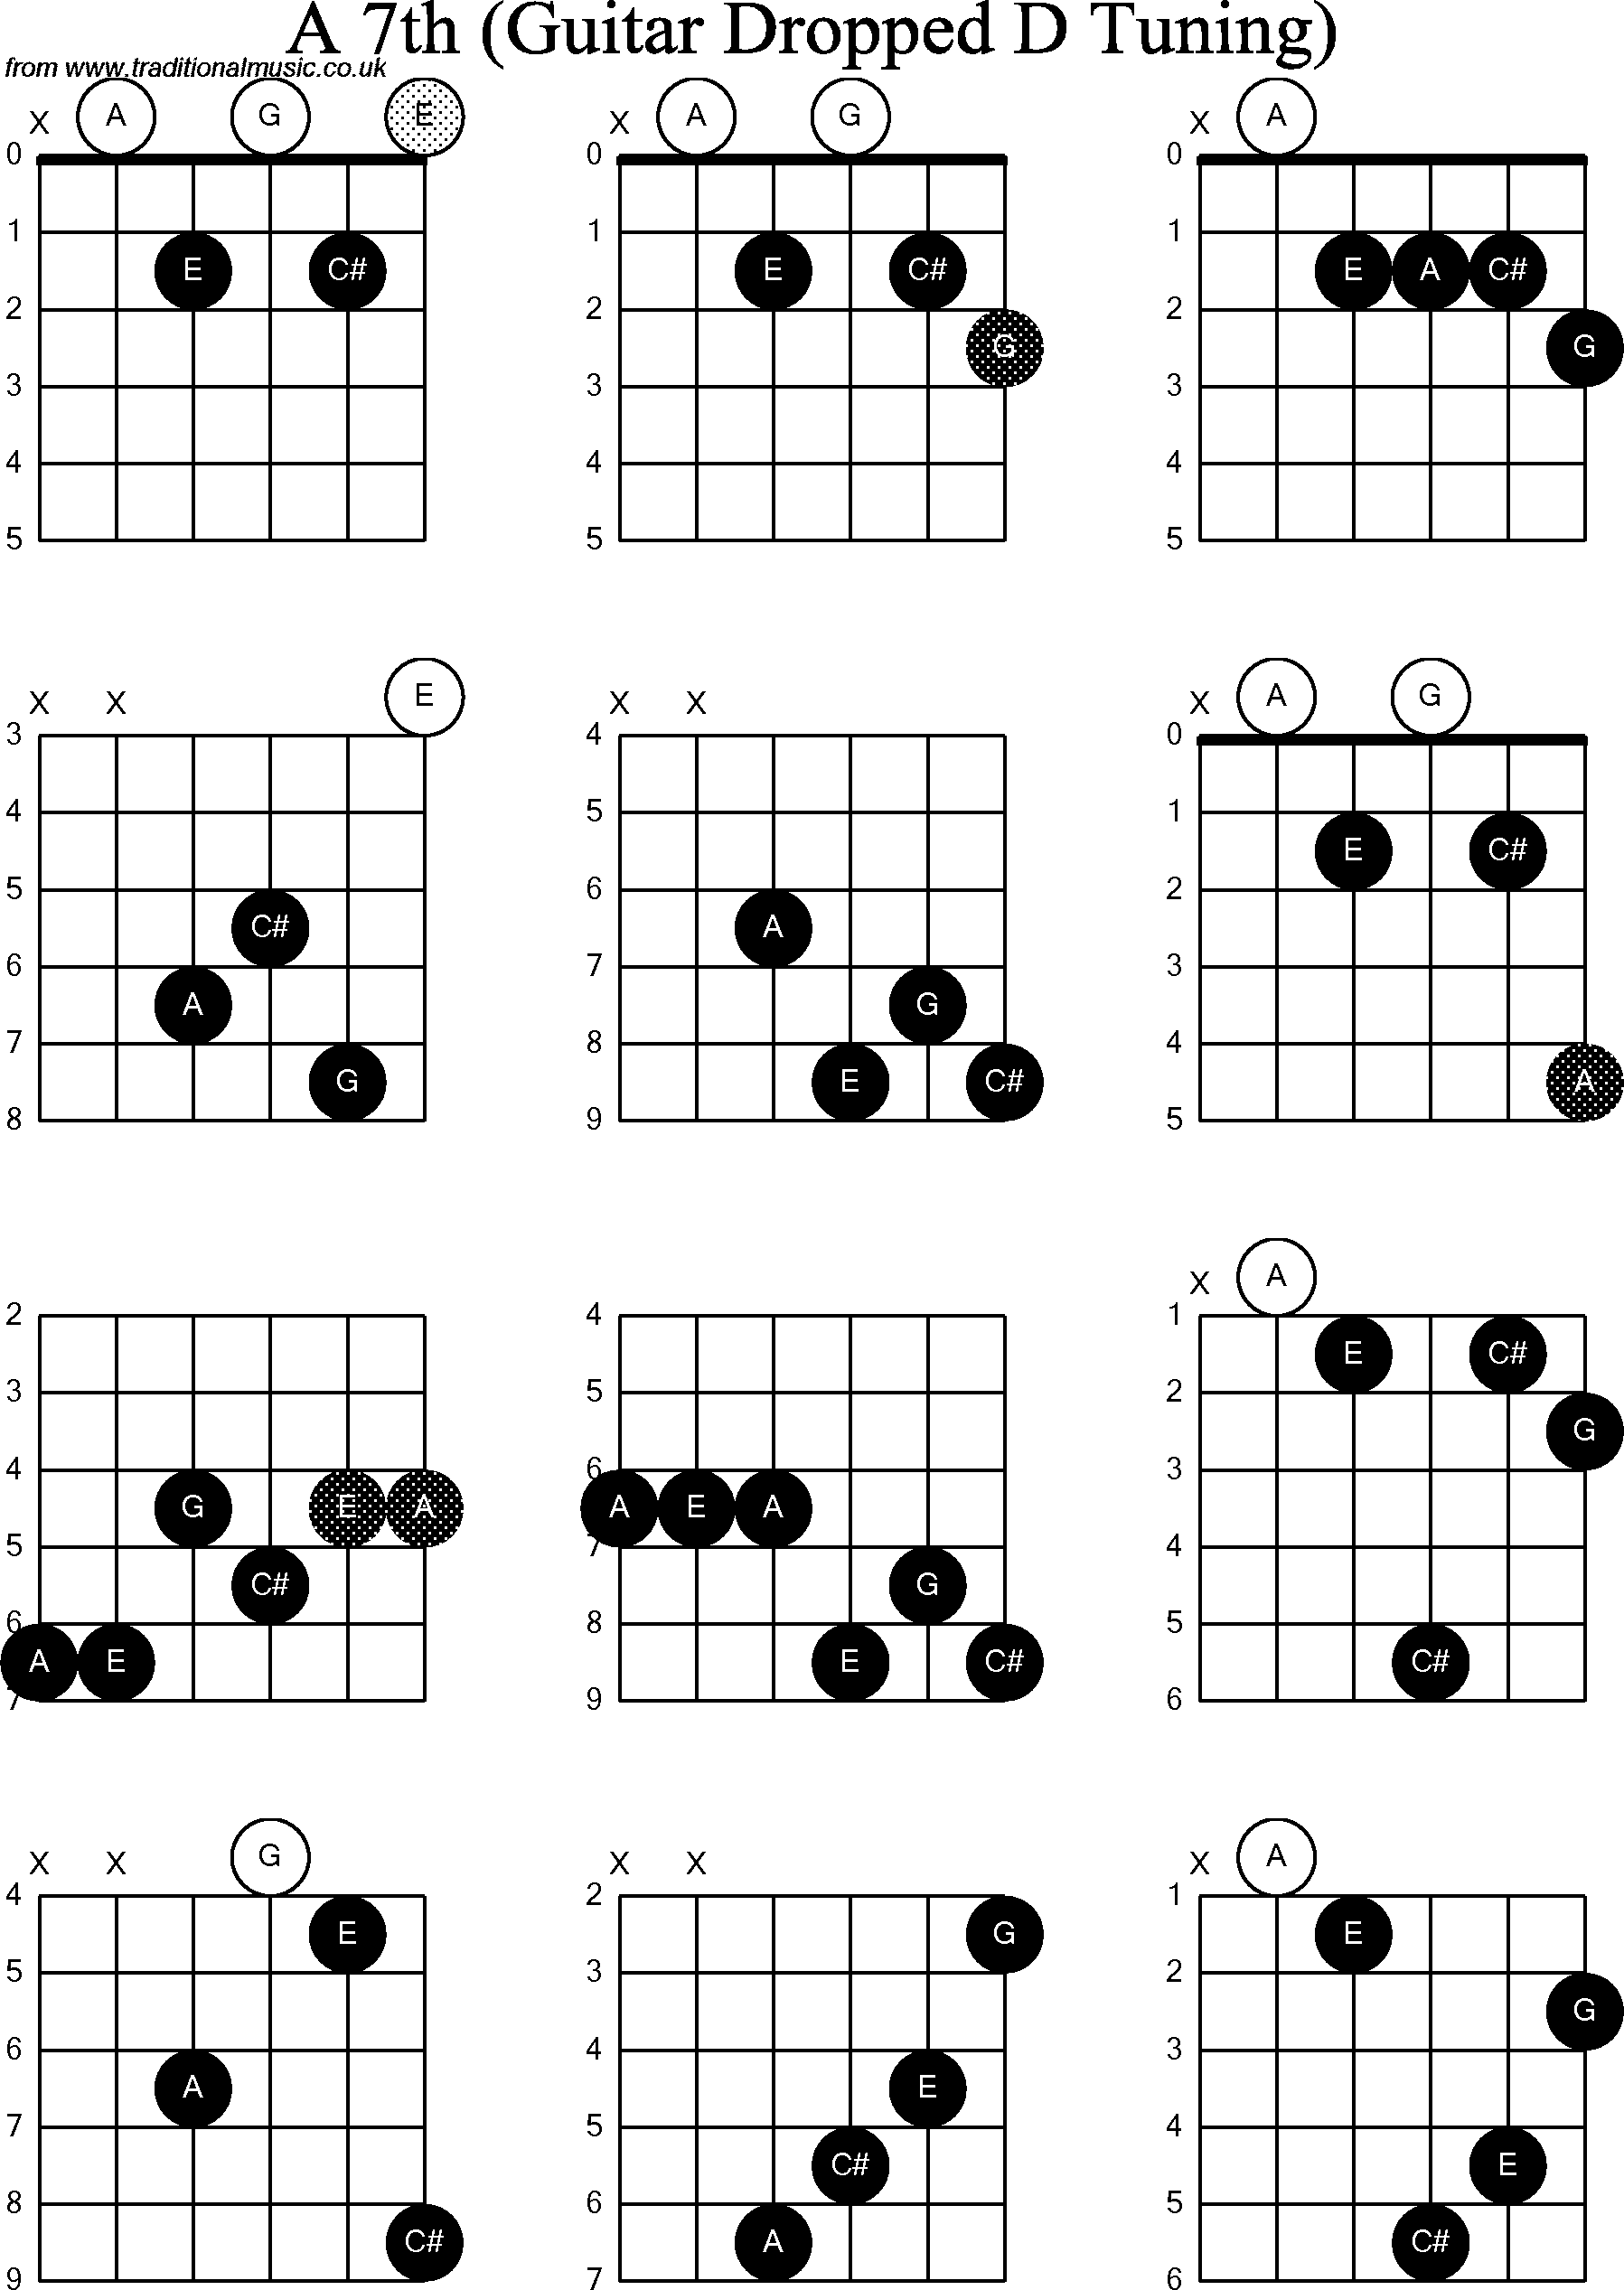 Chord diagrams for dropped D Guitar(DADGBE), A7th